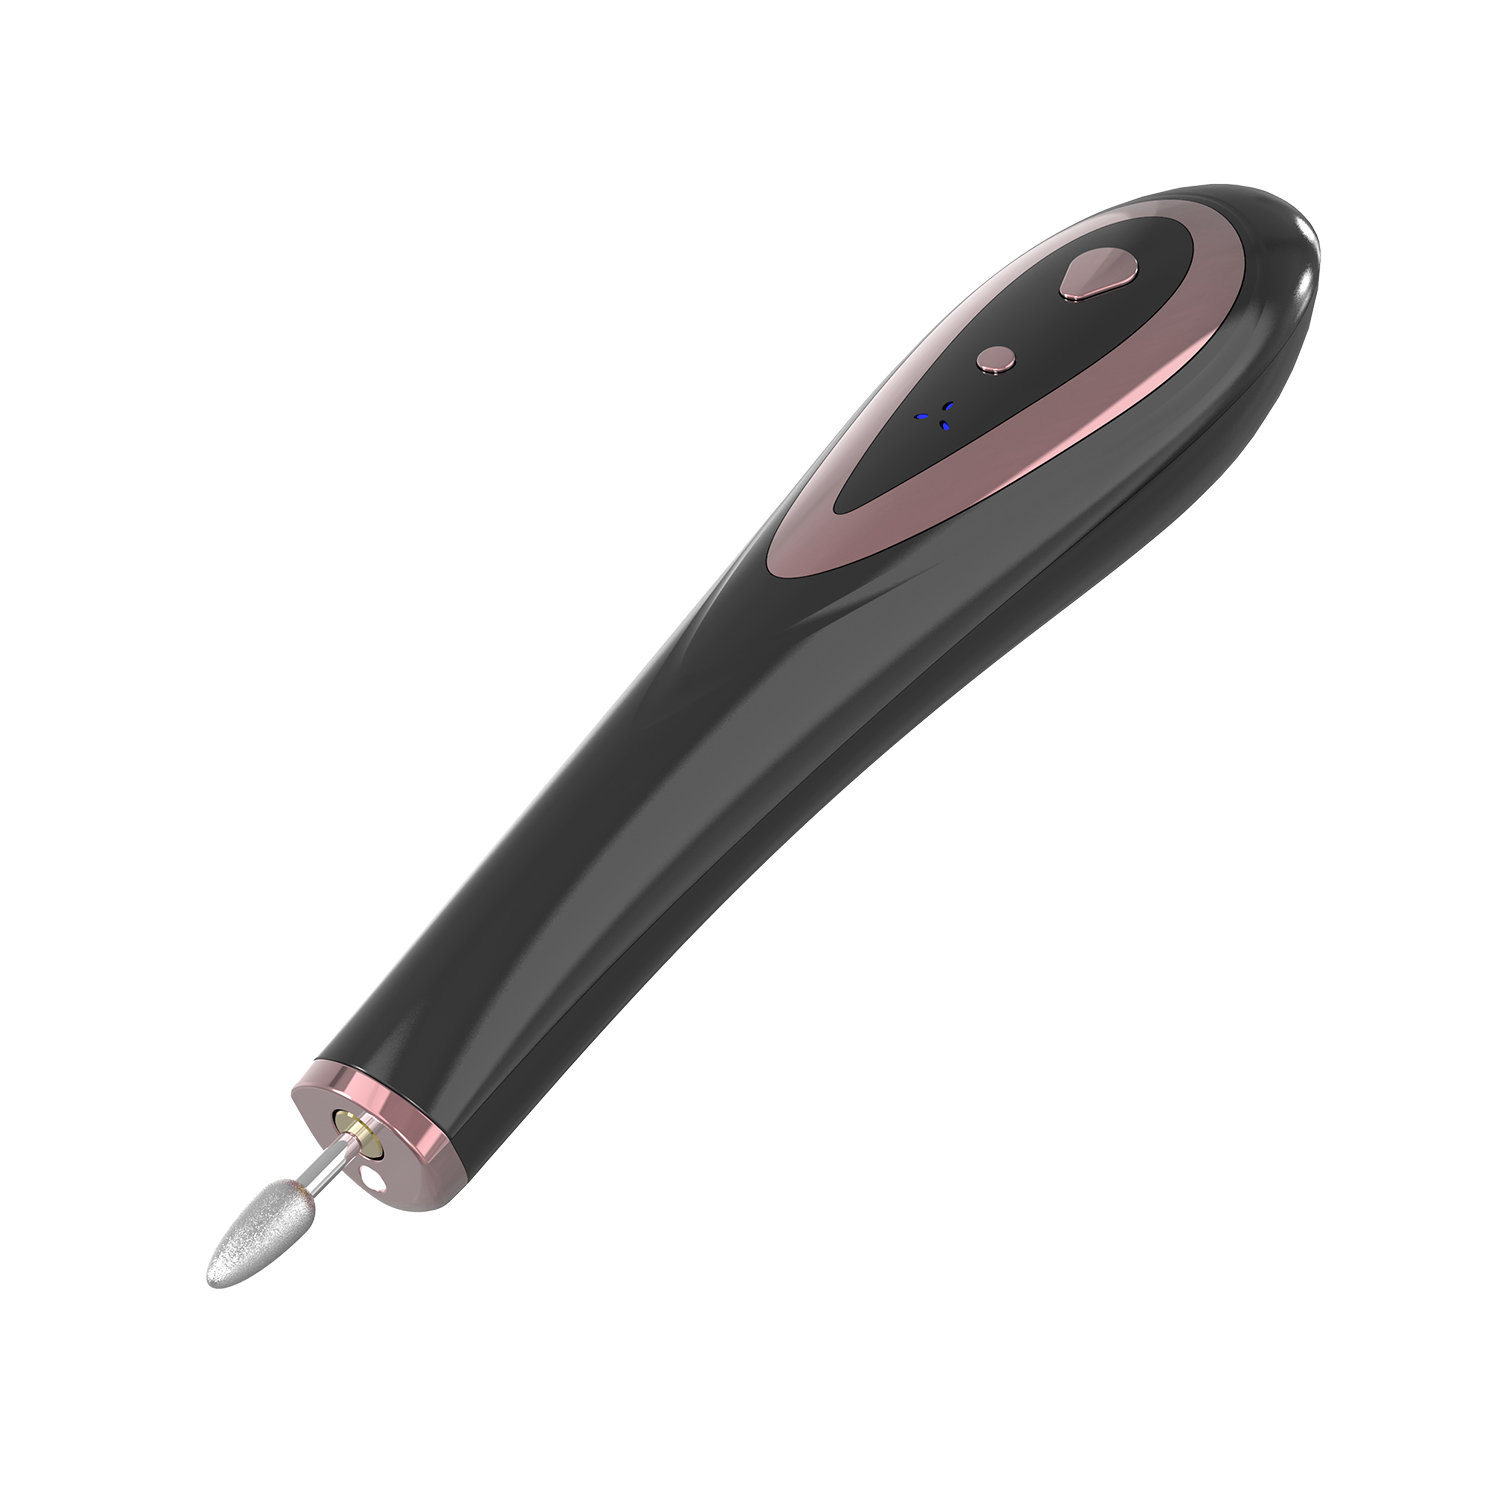 Portable Built-in battery electric manicure nail file Manufacturers, Portable Built-in battery electric manicure nail file Factory, Supply Portable Built-in battery electric manicure nail file